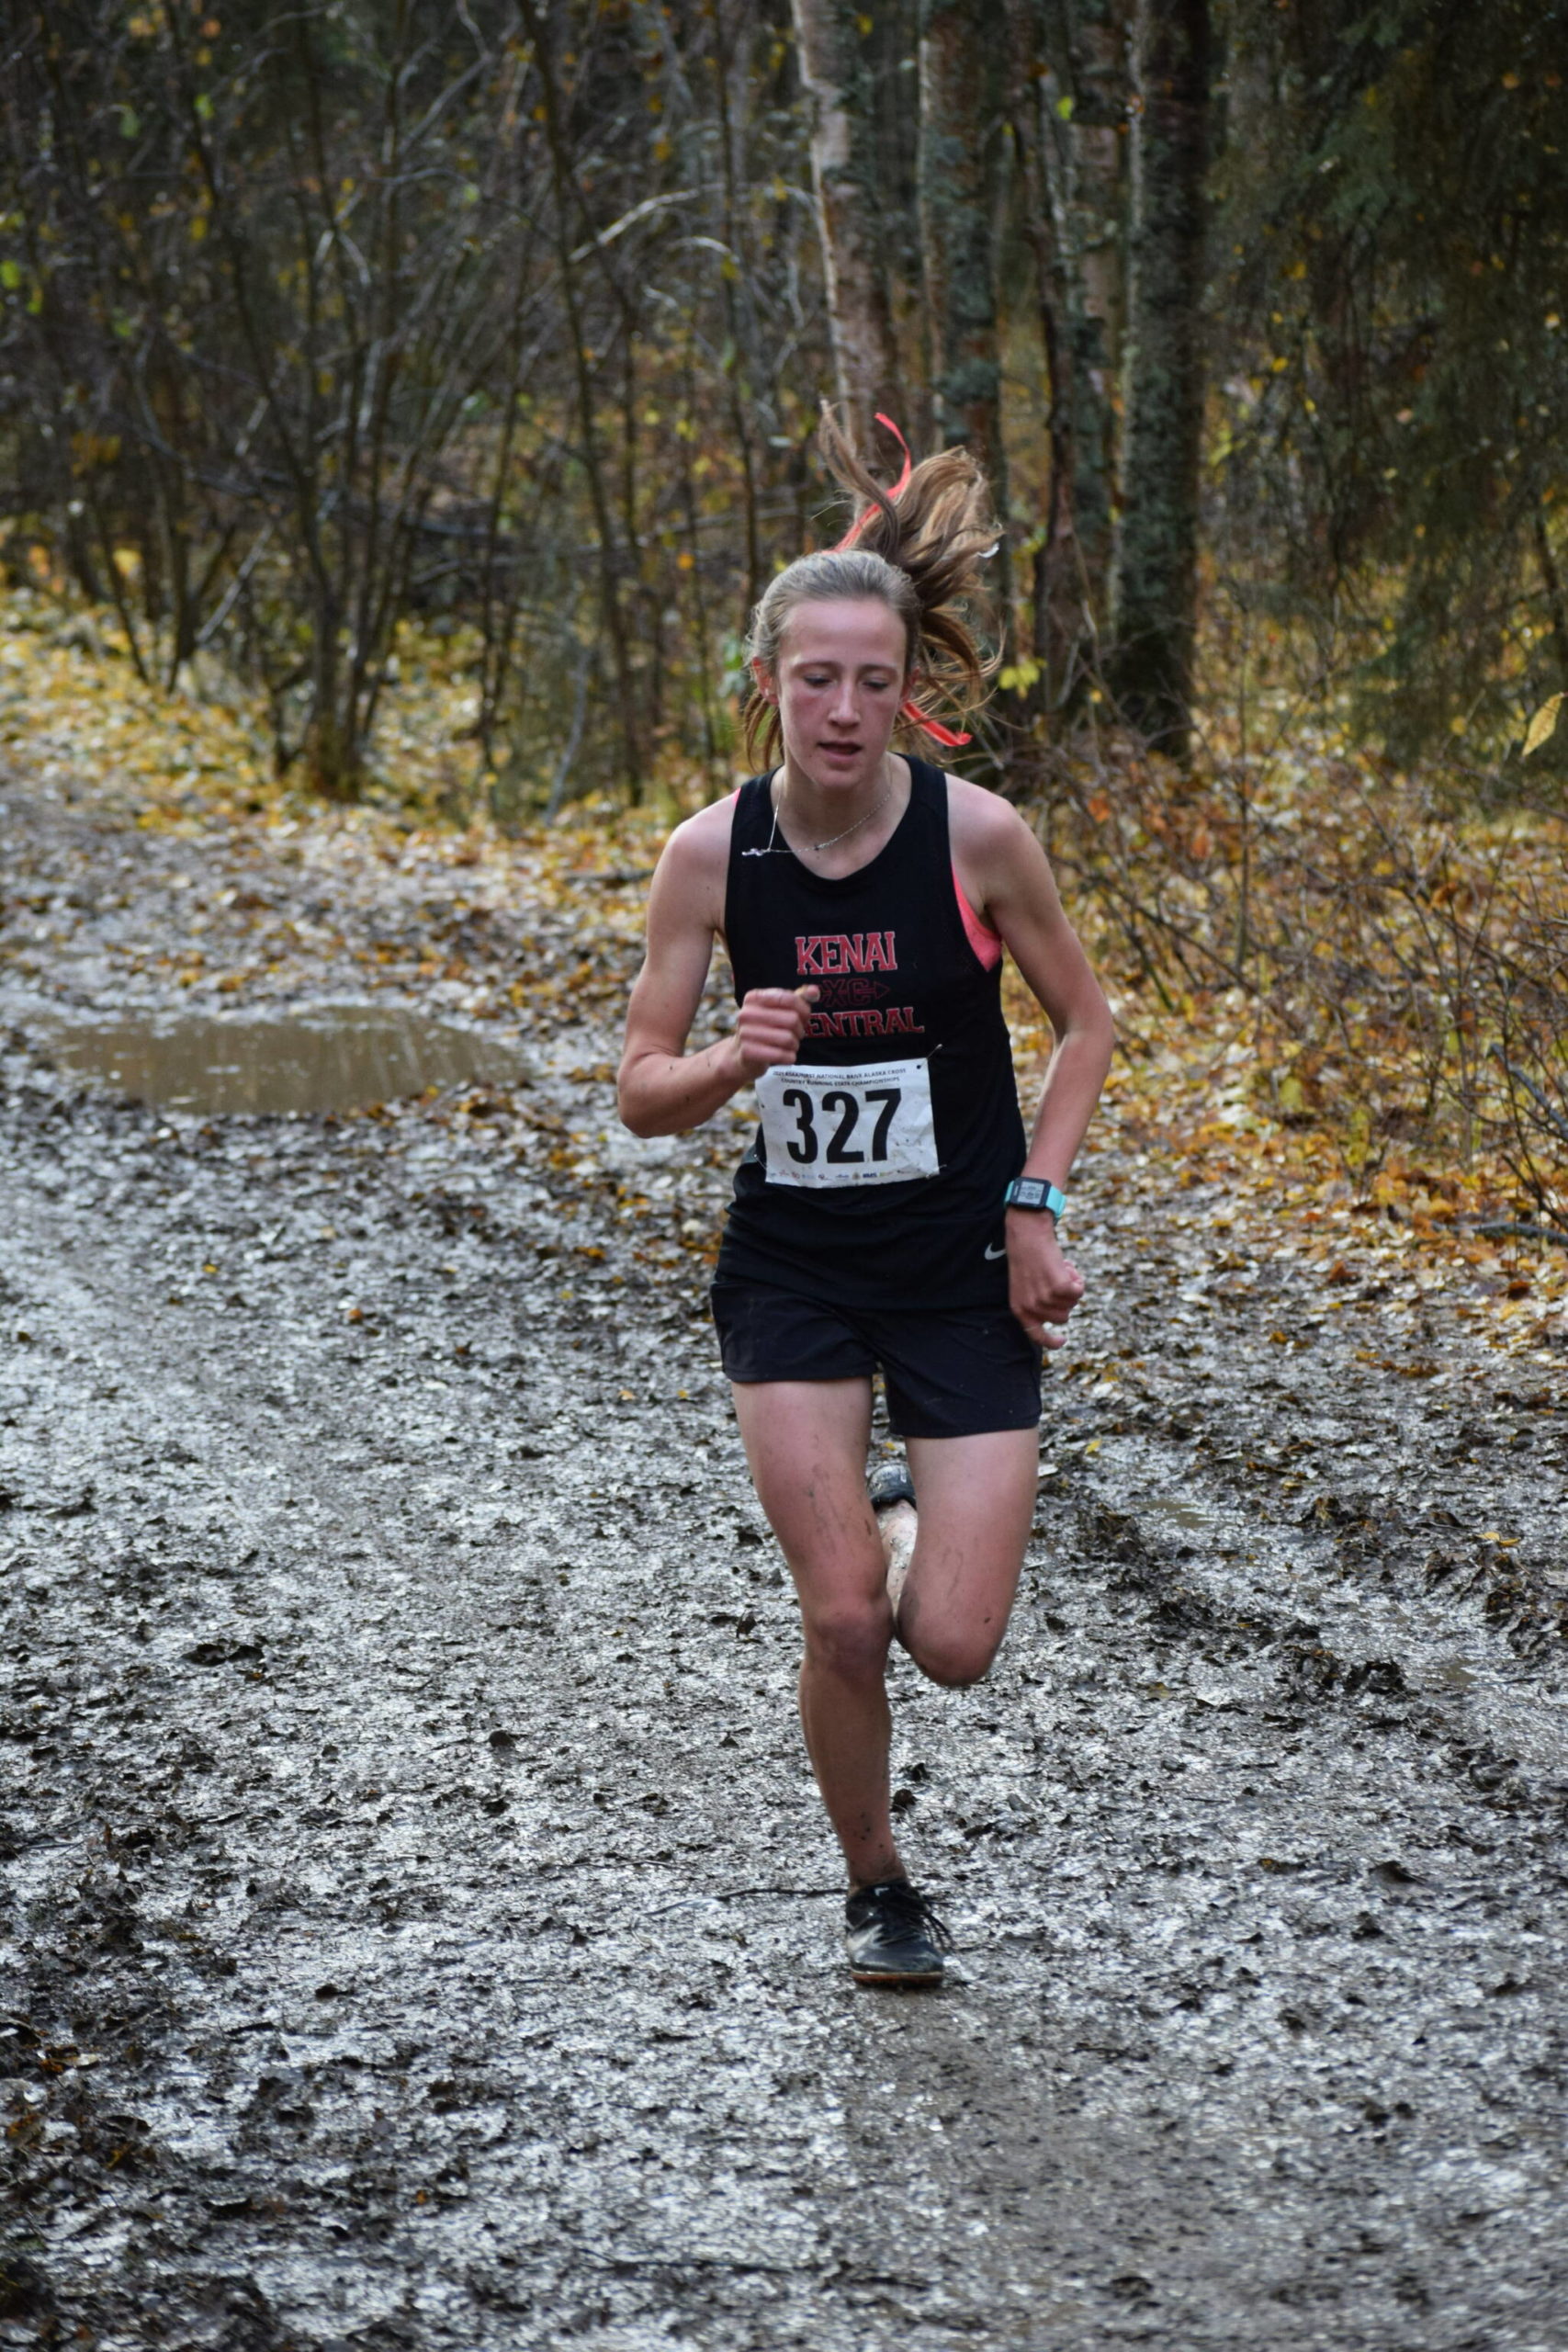 Jayna Boonstra of Kenai races her way to another Division II state cross country championship at Bartlett High School in Anchorage, Alaska on Saturday, Oct. 9, 2021. (Camille Botello/Peninsula Clarion)